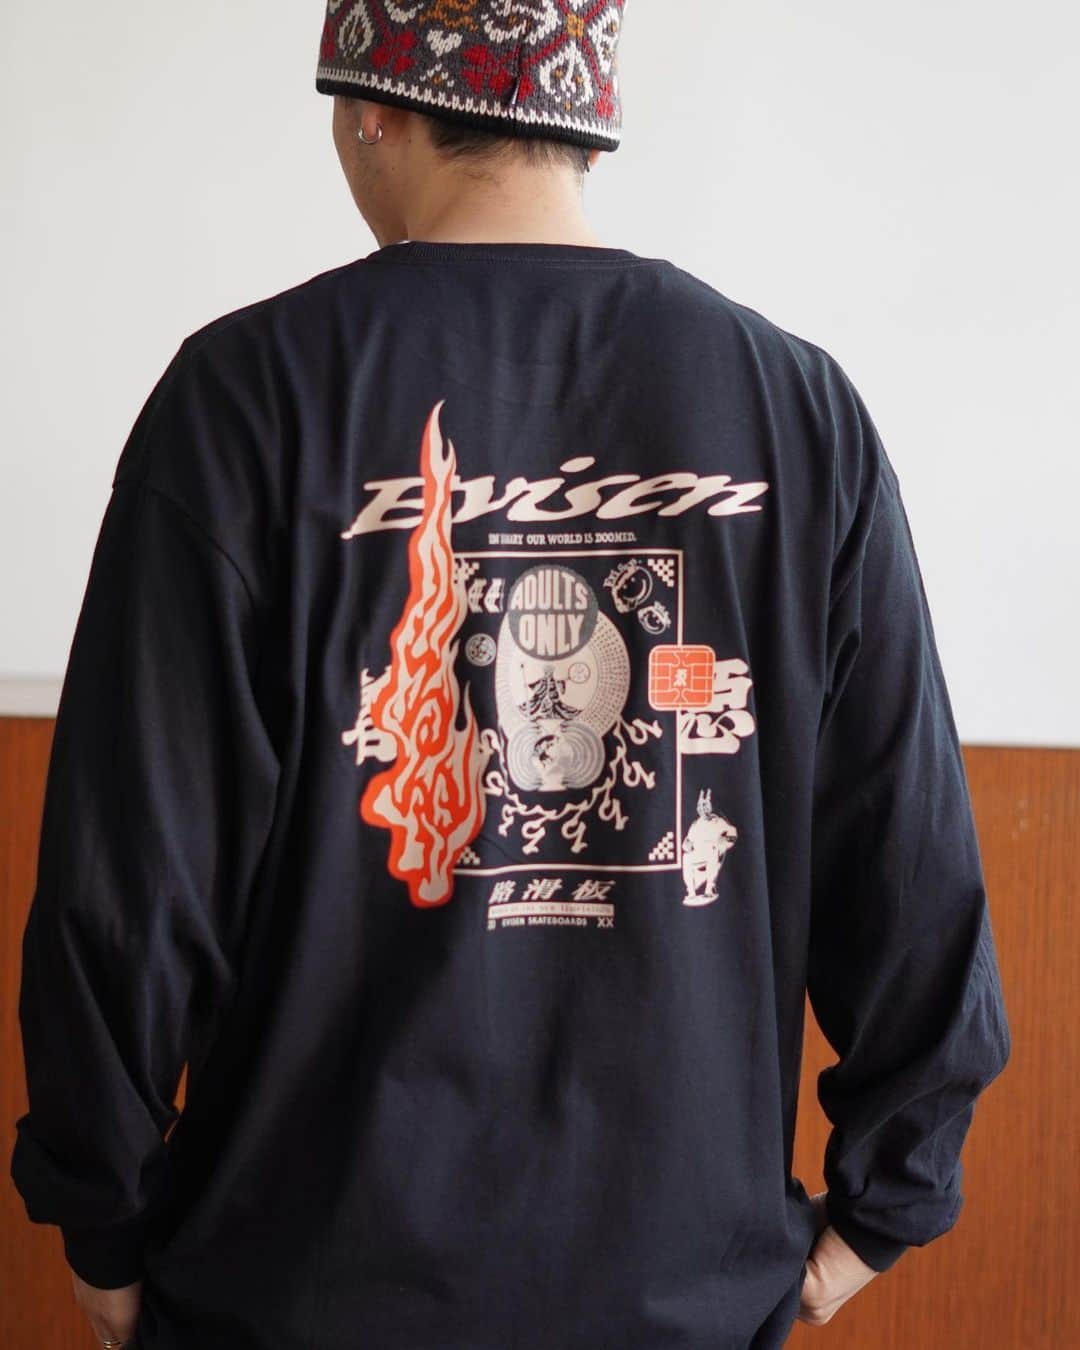 ARKのインスタグラム：「Evisen Skateboardsゑ  NEO ADULTS ONLY LS ￥7,150- (tax  in)  #evisenskateboards #evisen @arknets_official」